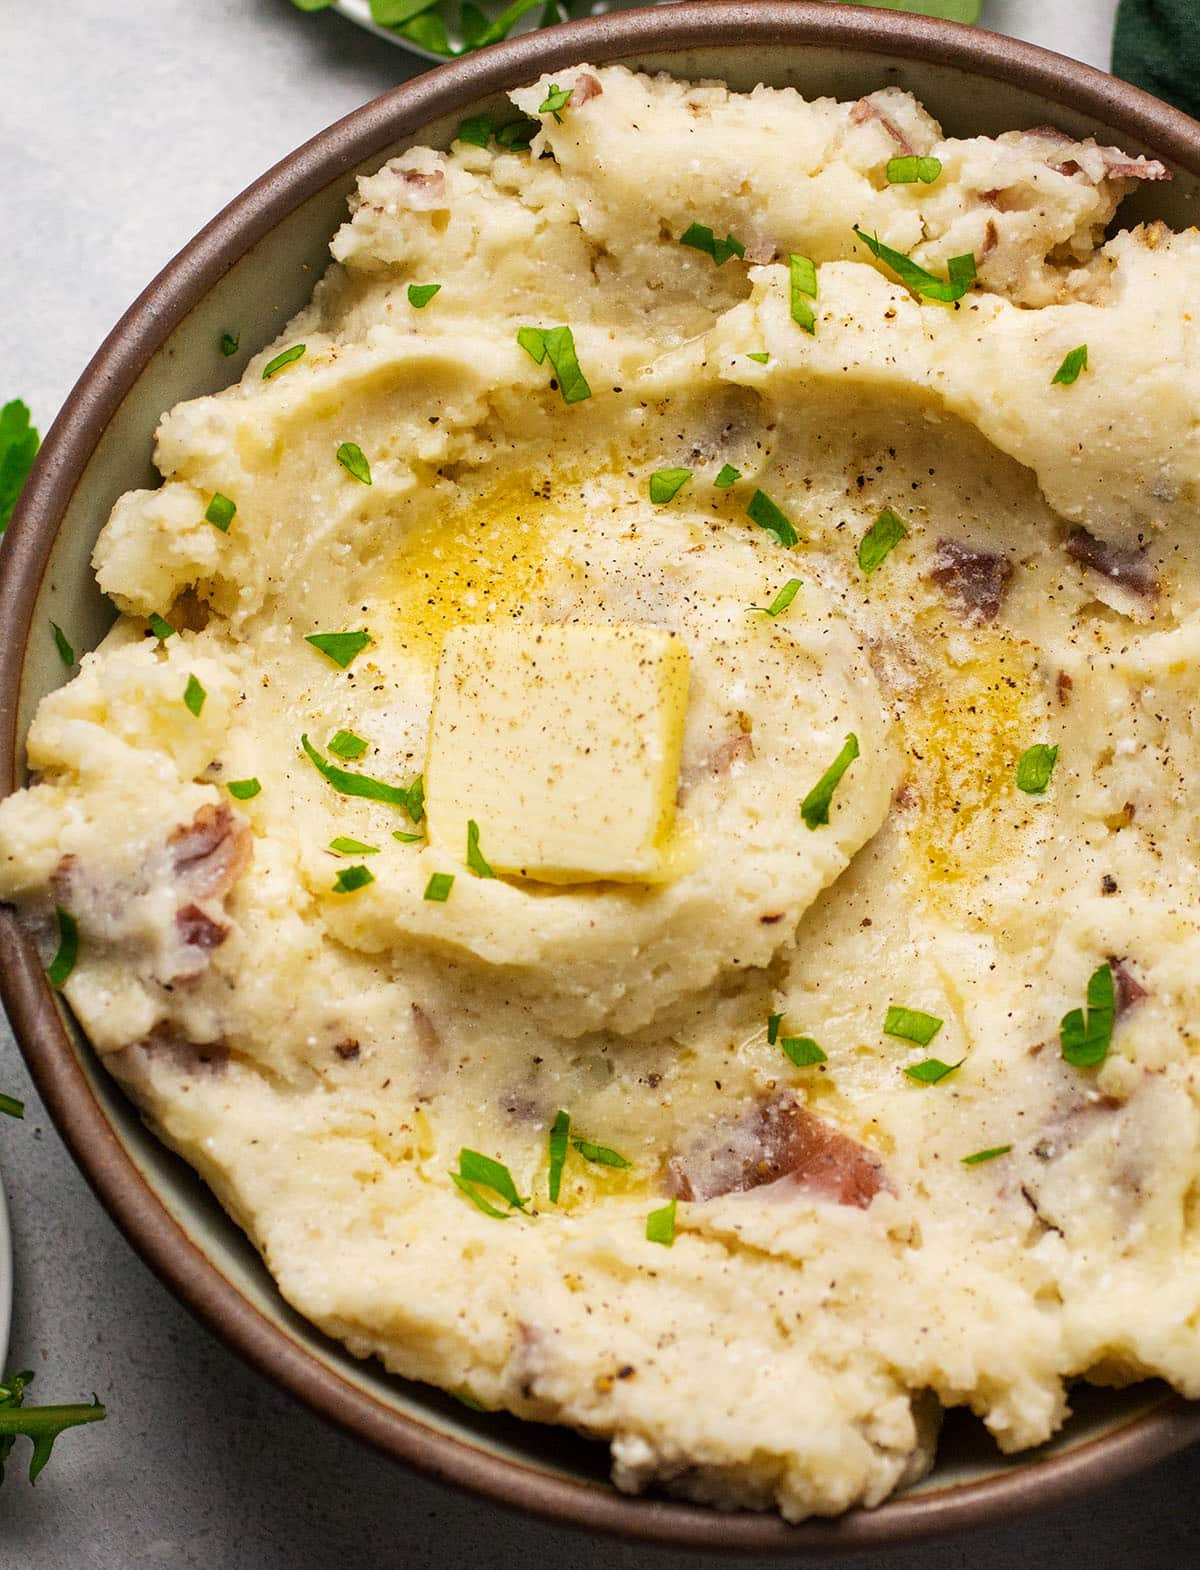 Mashed potatoes topped with fresh parsley and a pat of butter.